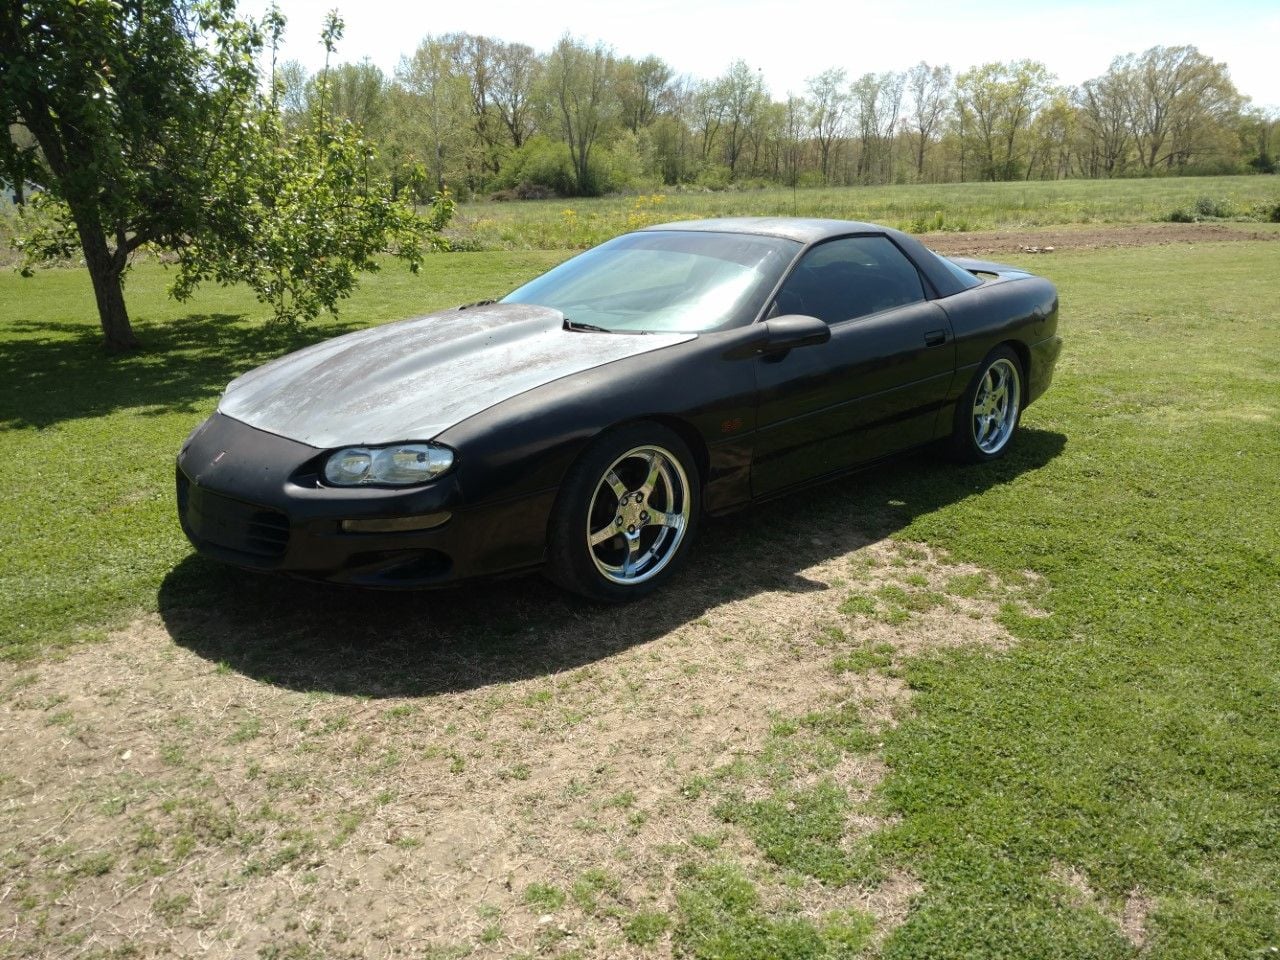 2002 Chevrolet Camaro - 2002 Chevy Camaro z28 Hardtop Street/Strip Car - Used - VIN 2G1FP22G022143309 - 123,214 Miles - 8 cyl - 2WD - Automatic - Coupe - Black - Leoma, TN 38468, United States